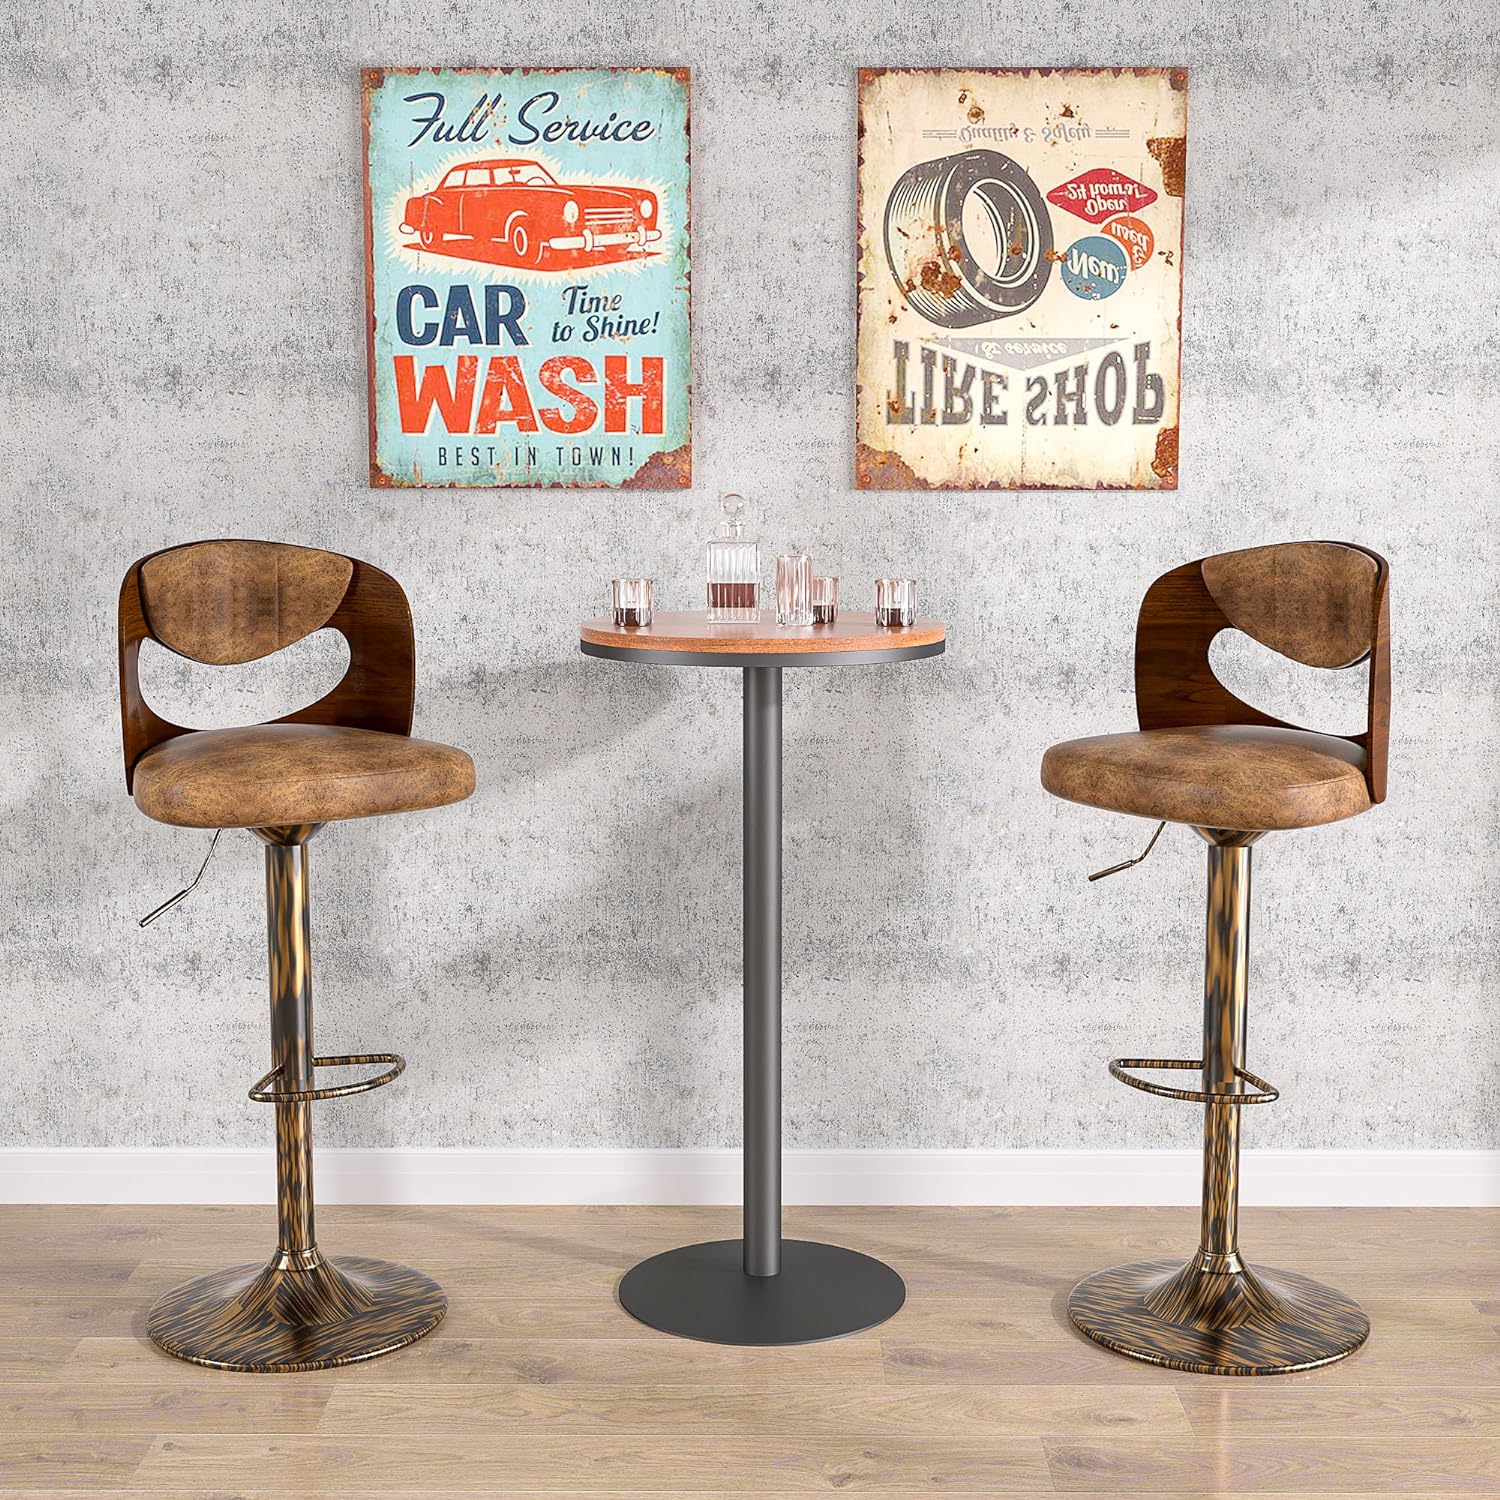 VECELO Bar Stool Set of 2,Counter Height Stools with Bentwood Back